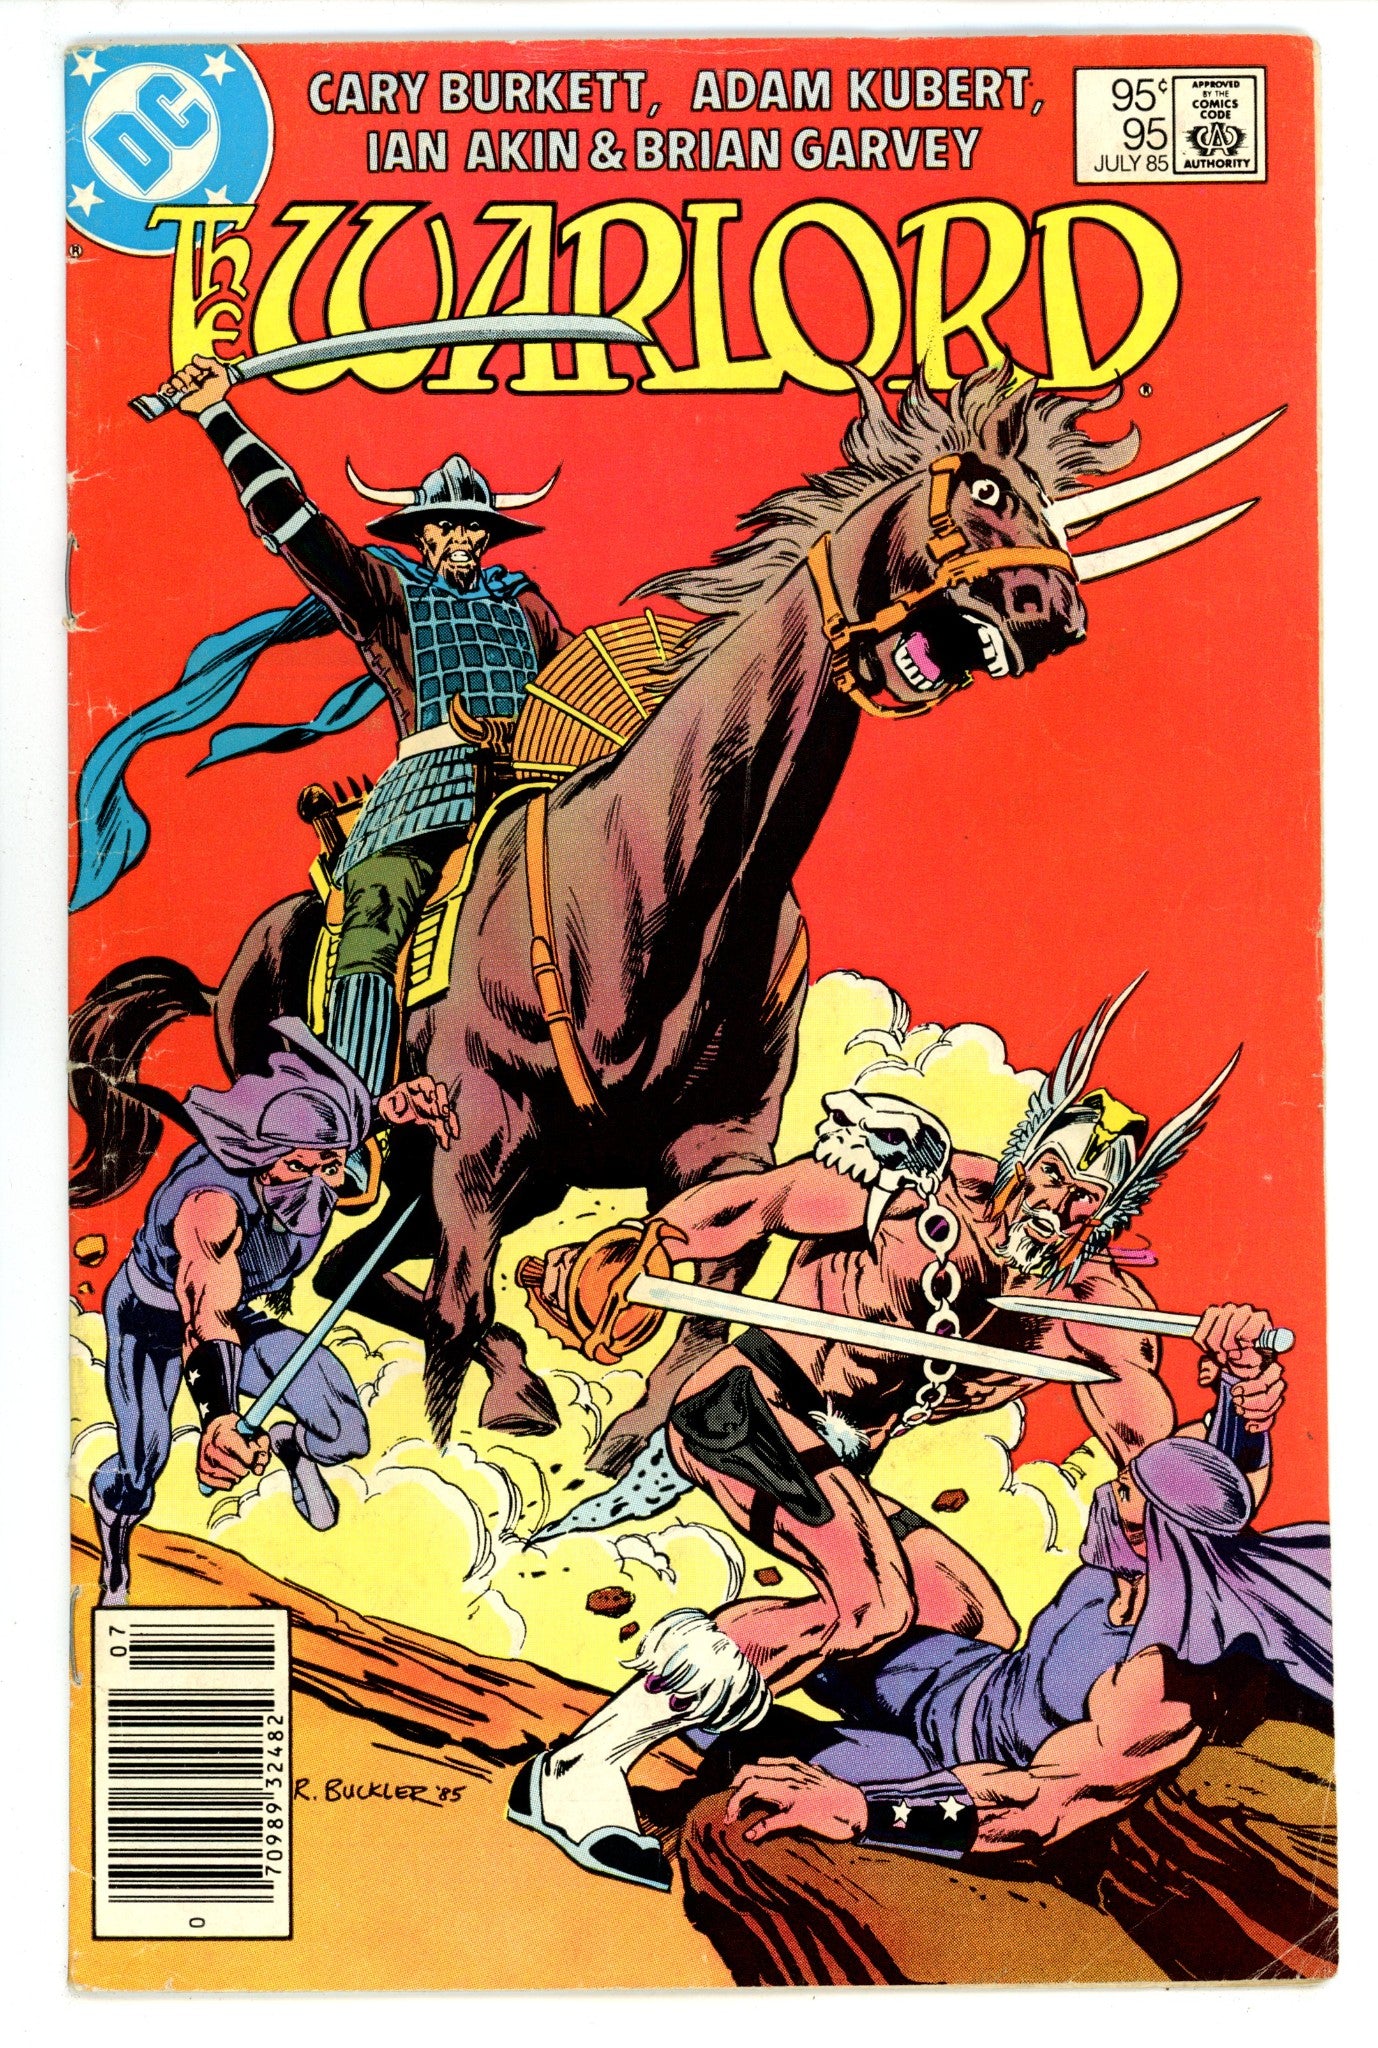 Warlord Vol 1 95 GD/VG (3.0) (1985) Canadian Price Variant 